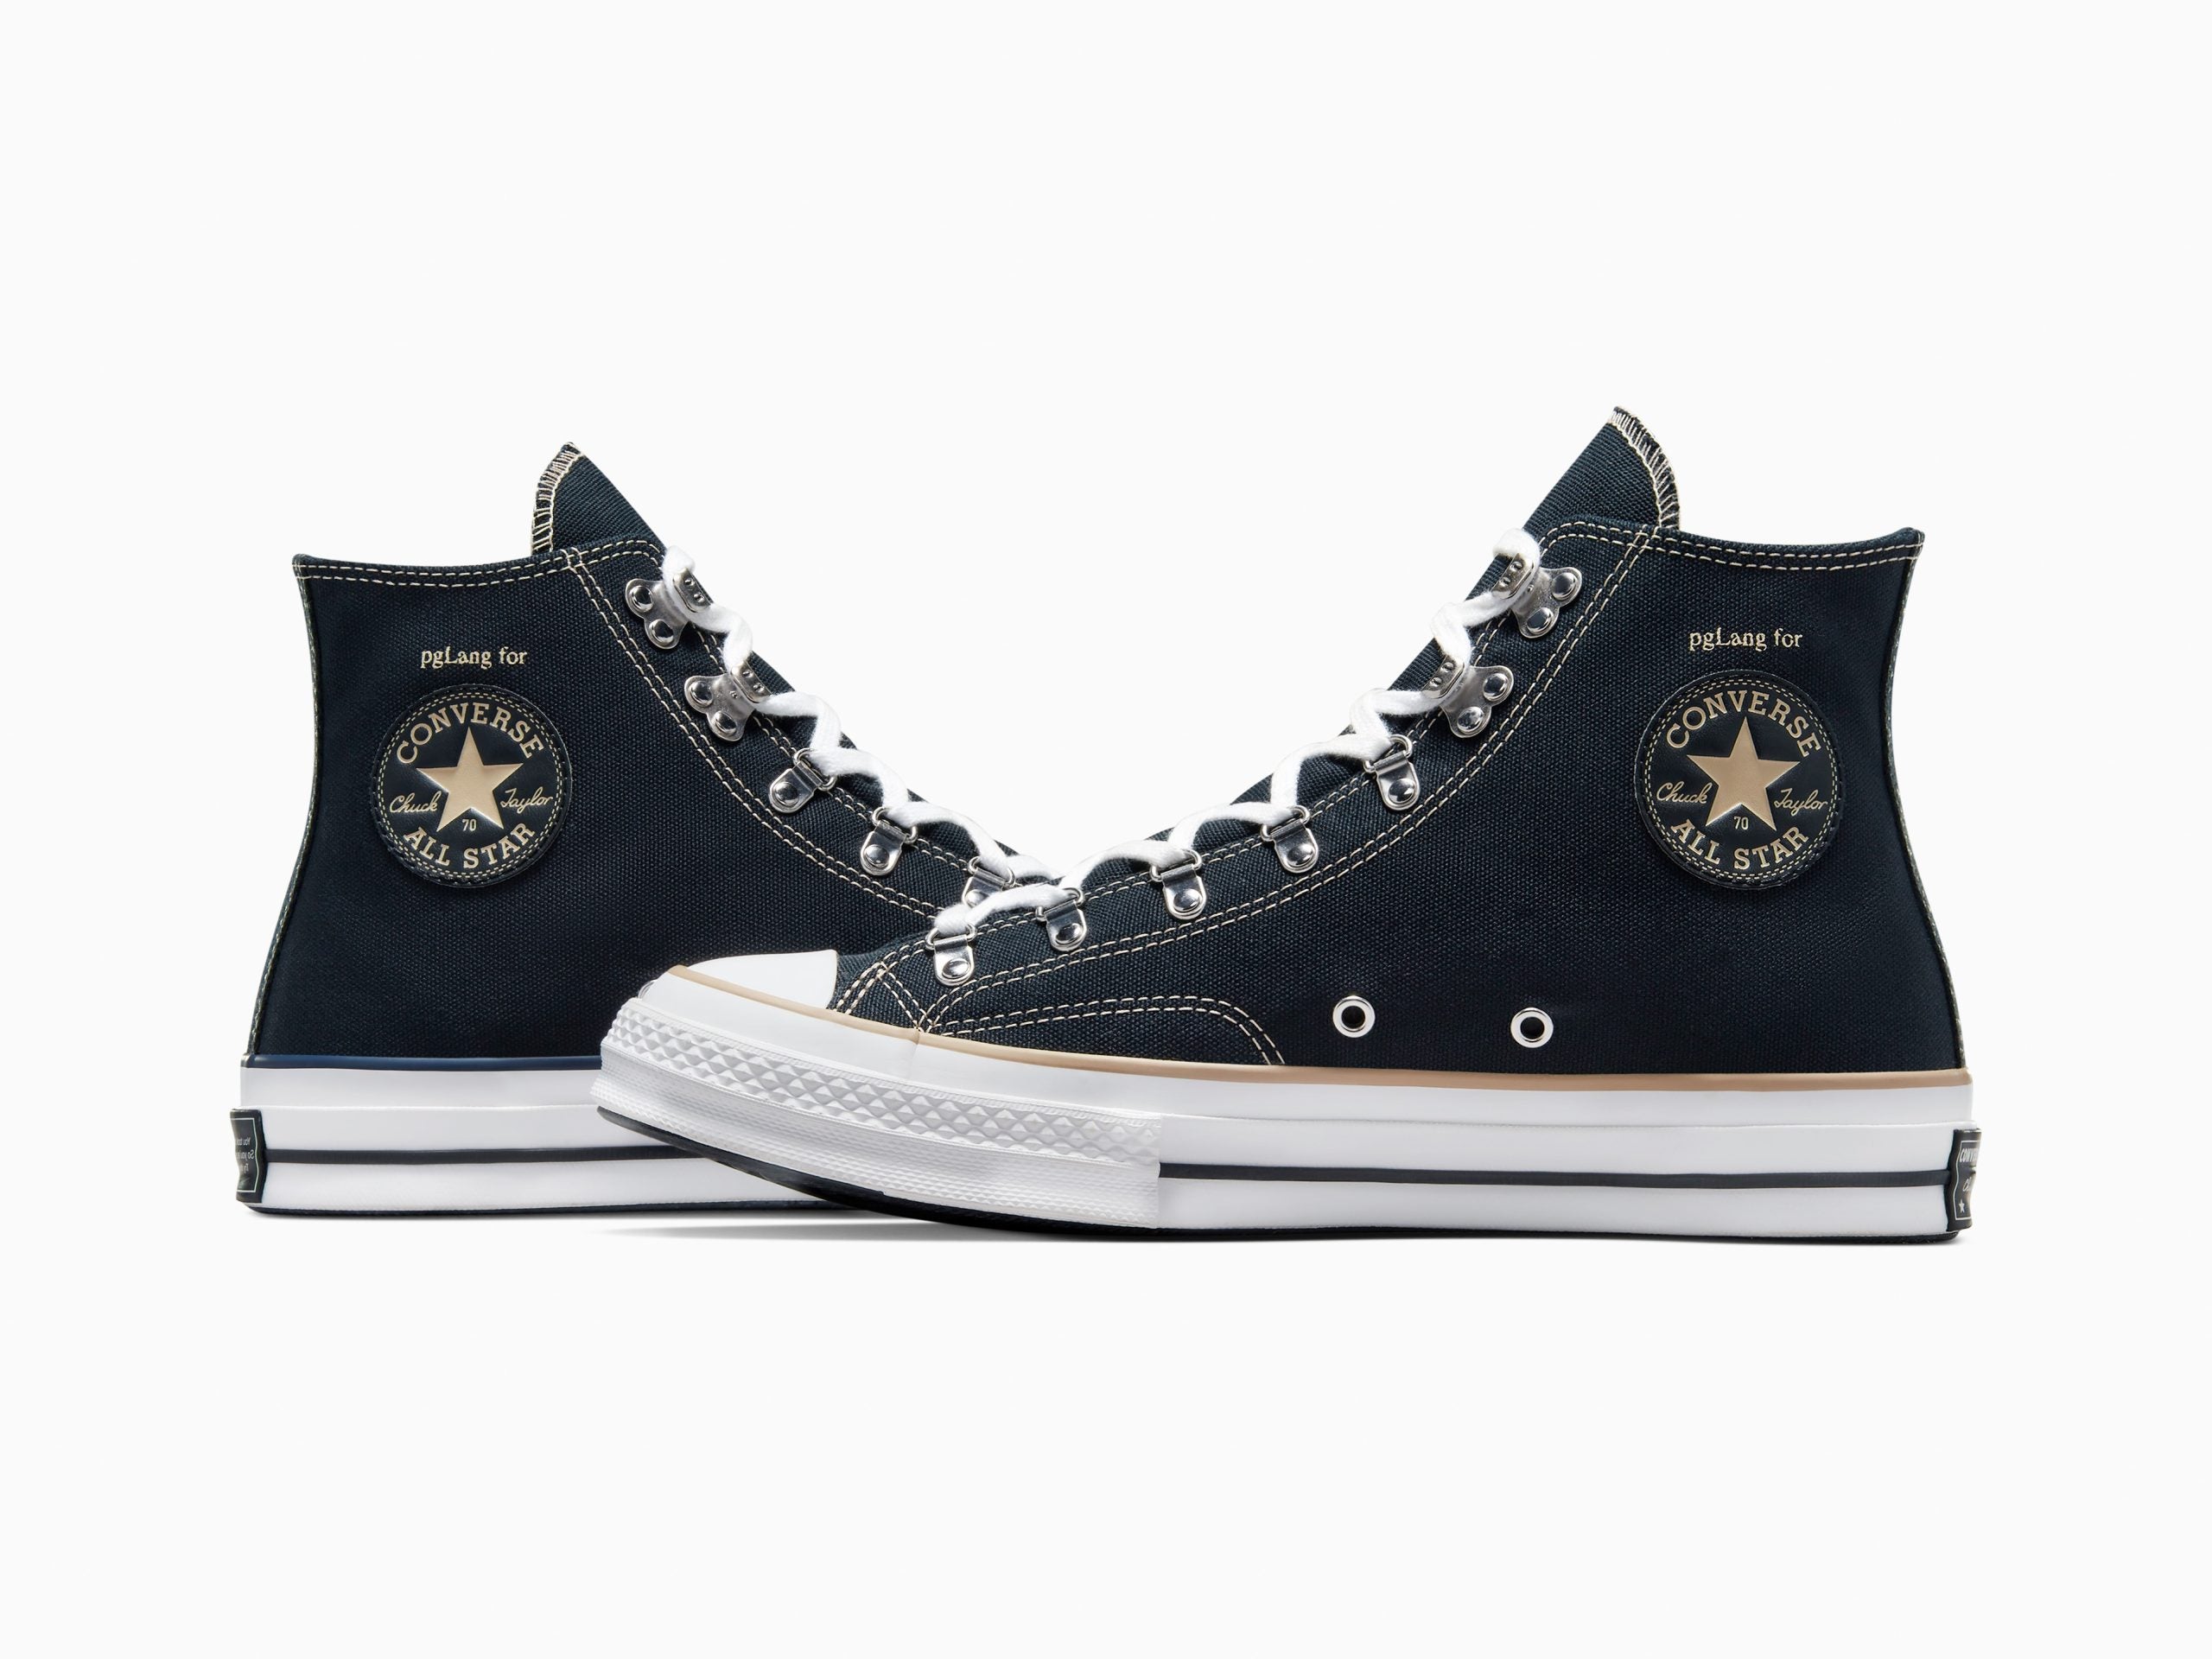 pgLang And Converse Unveil New Chuck 70 Silhouettes